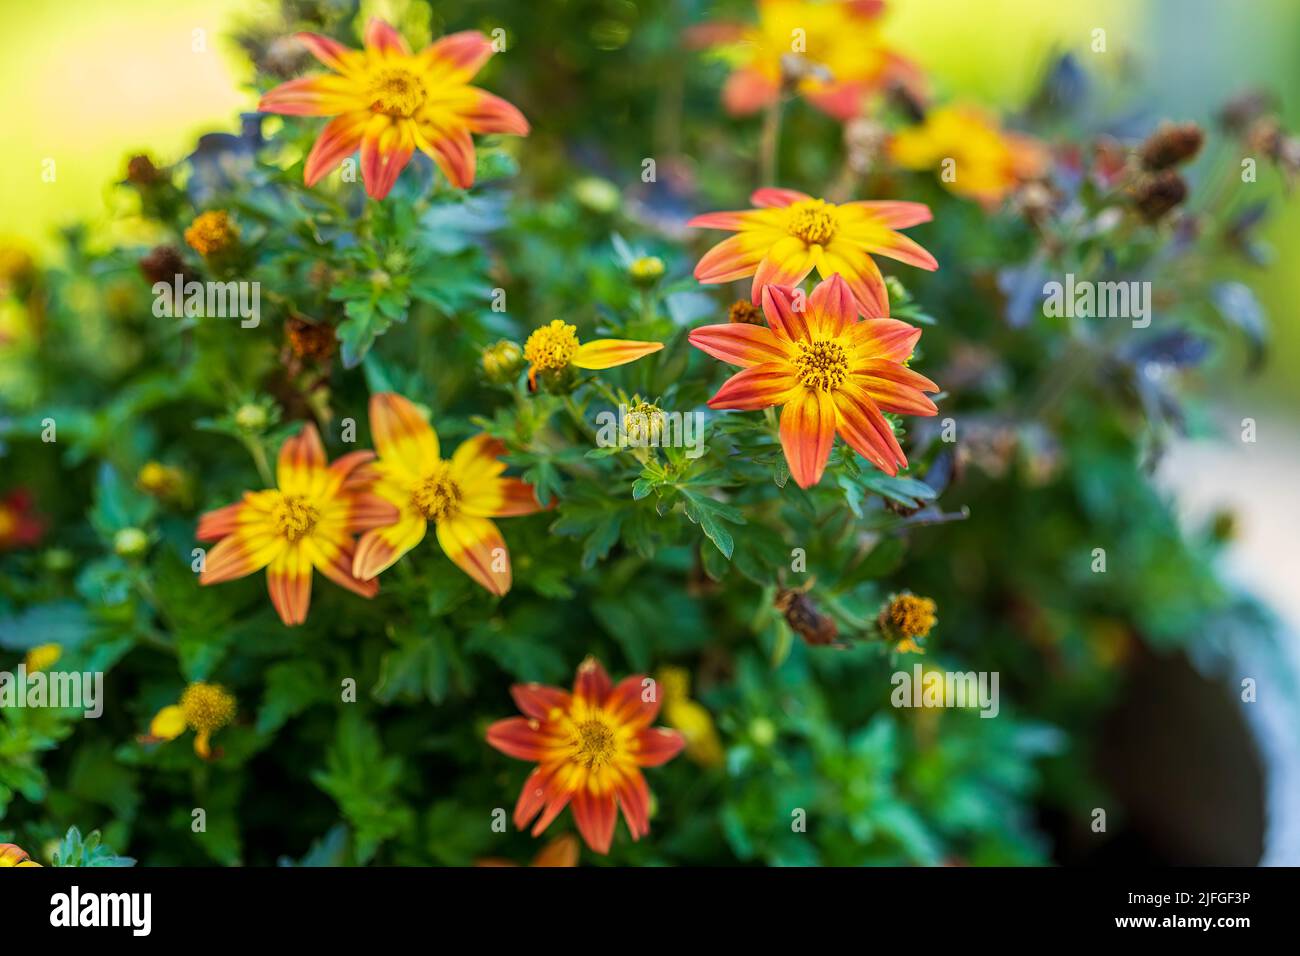 group of Campfire Flame Bidens in a flower pot on the patio Stock Photo